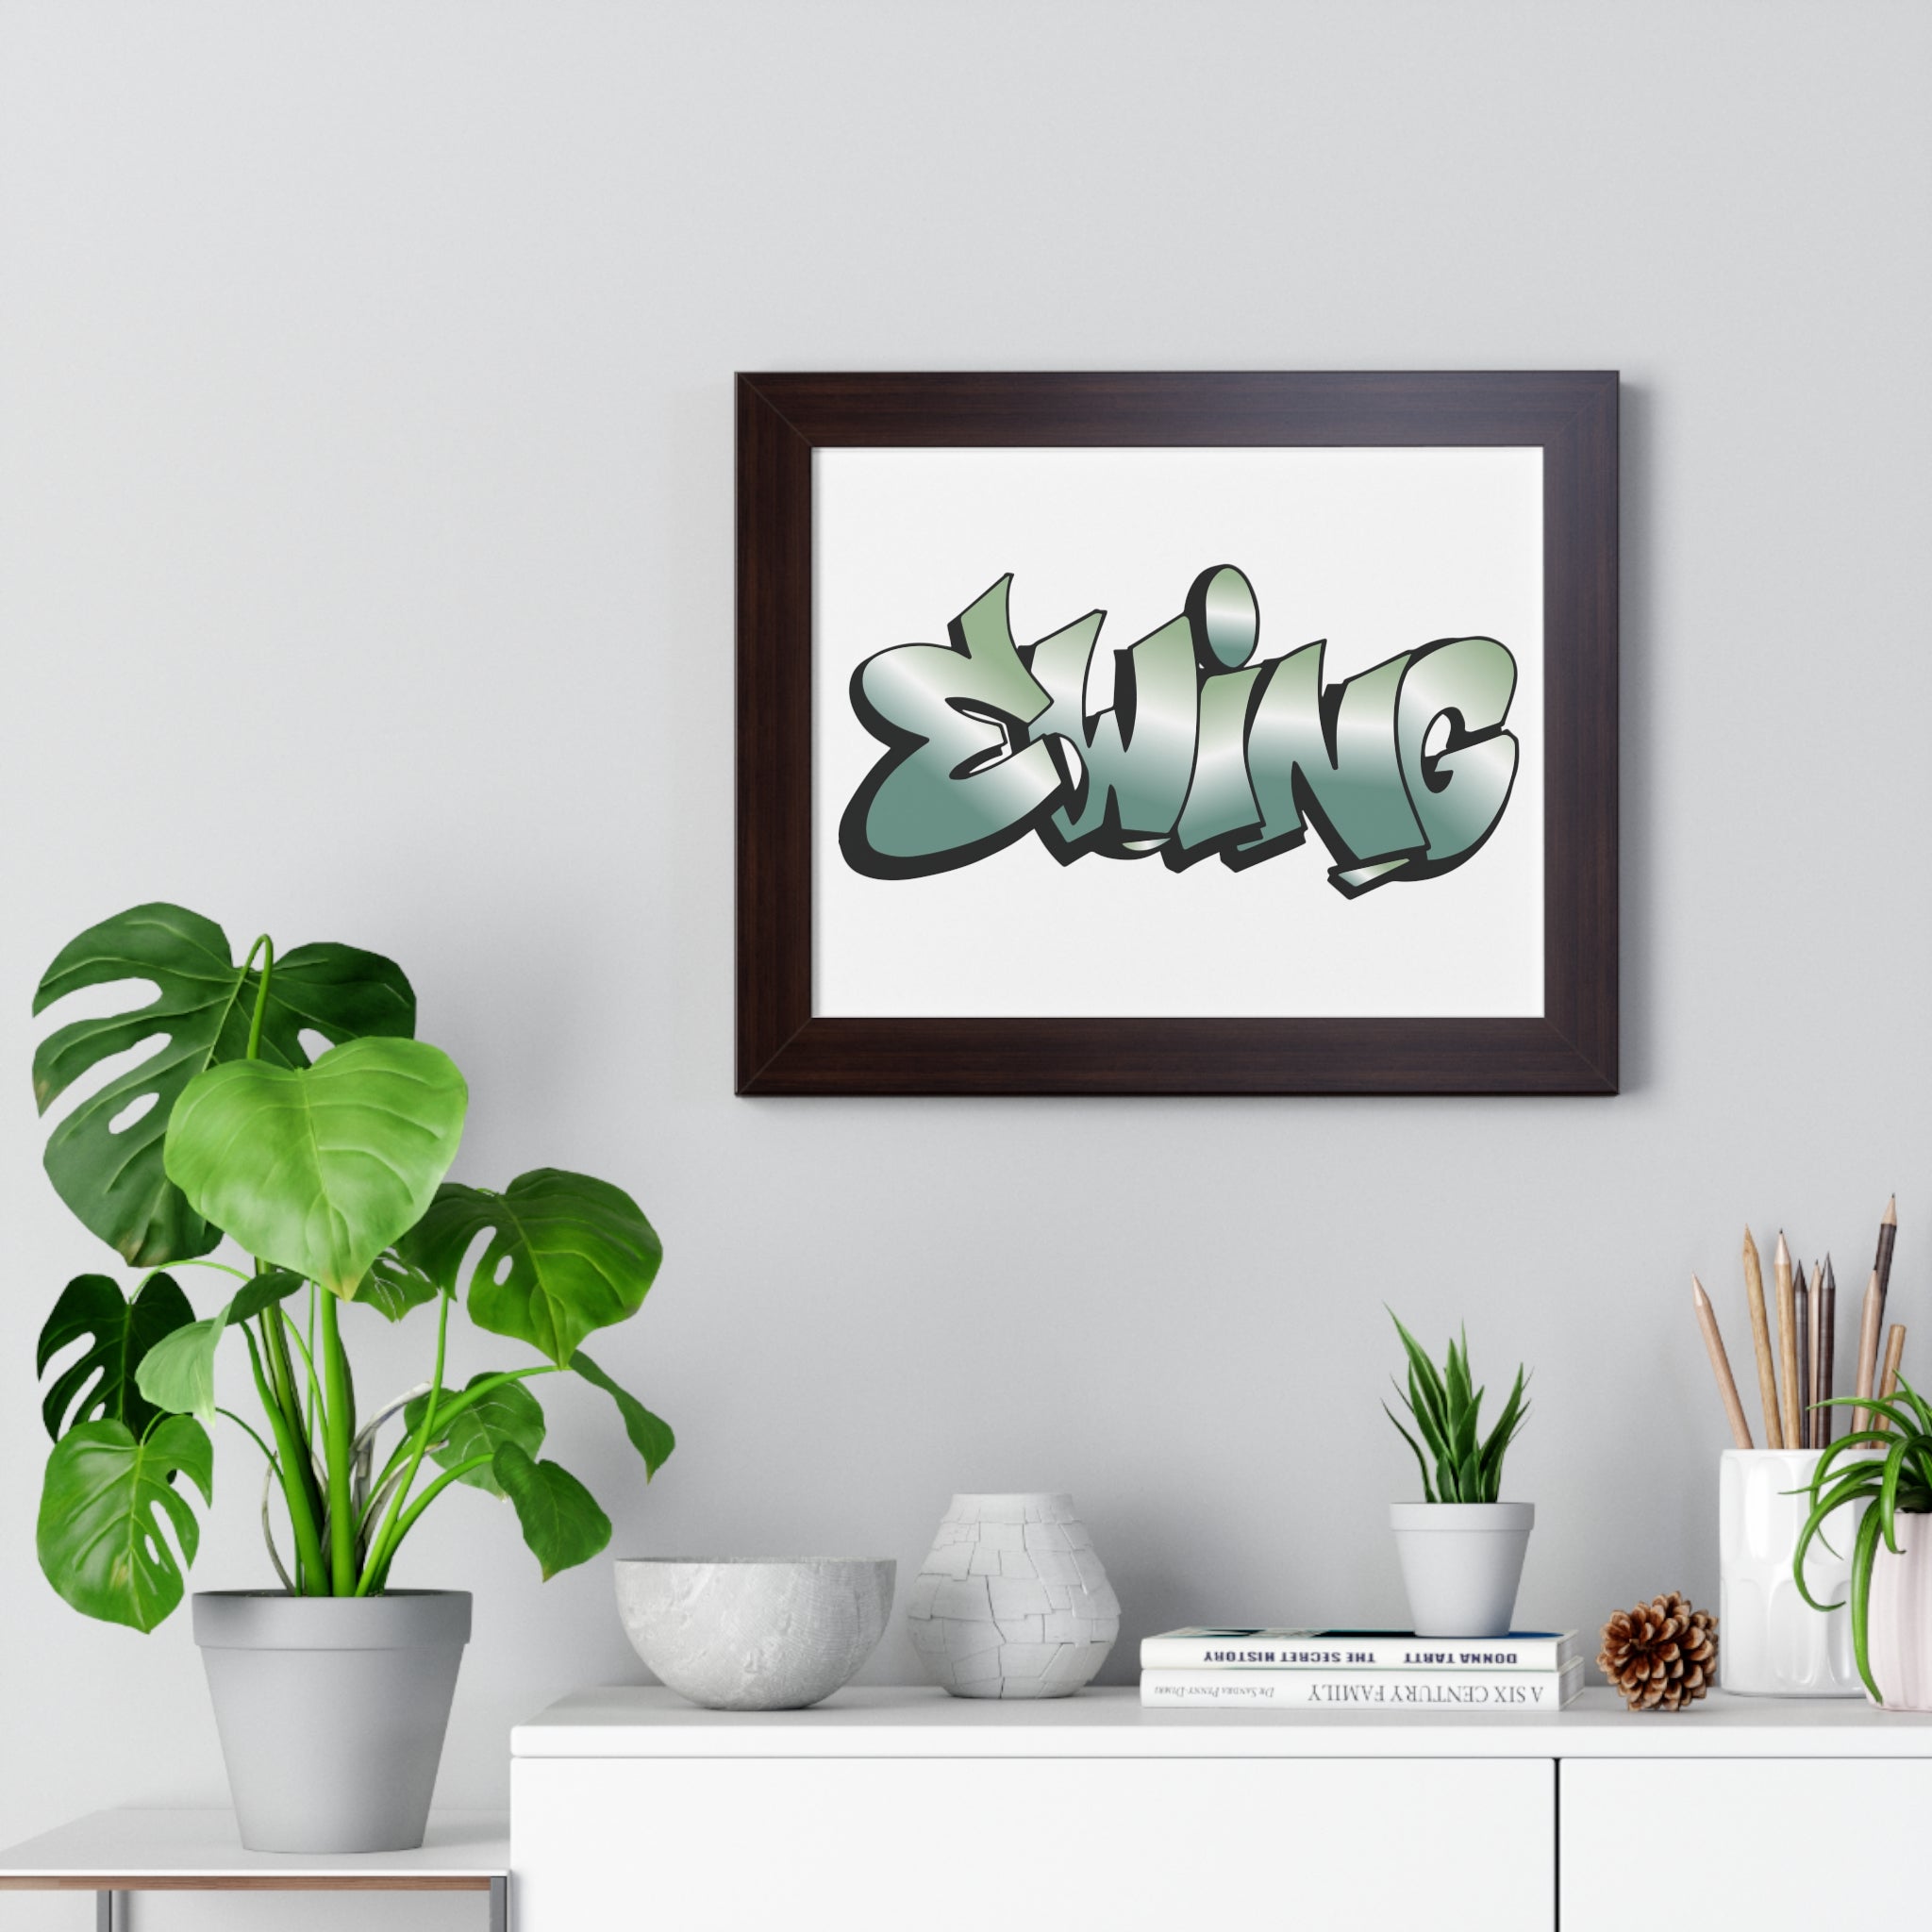 Ewing x Cope Framed Horizontal Poster